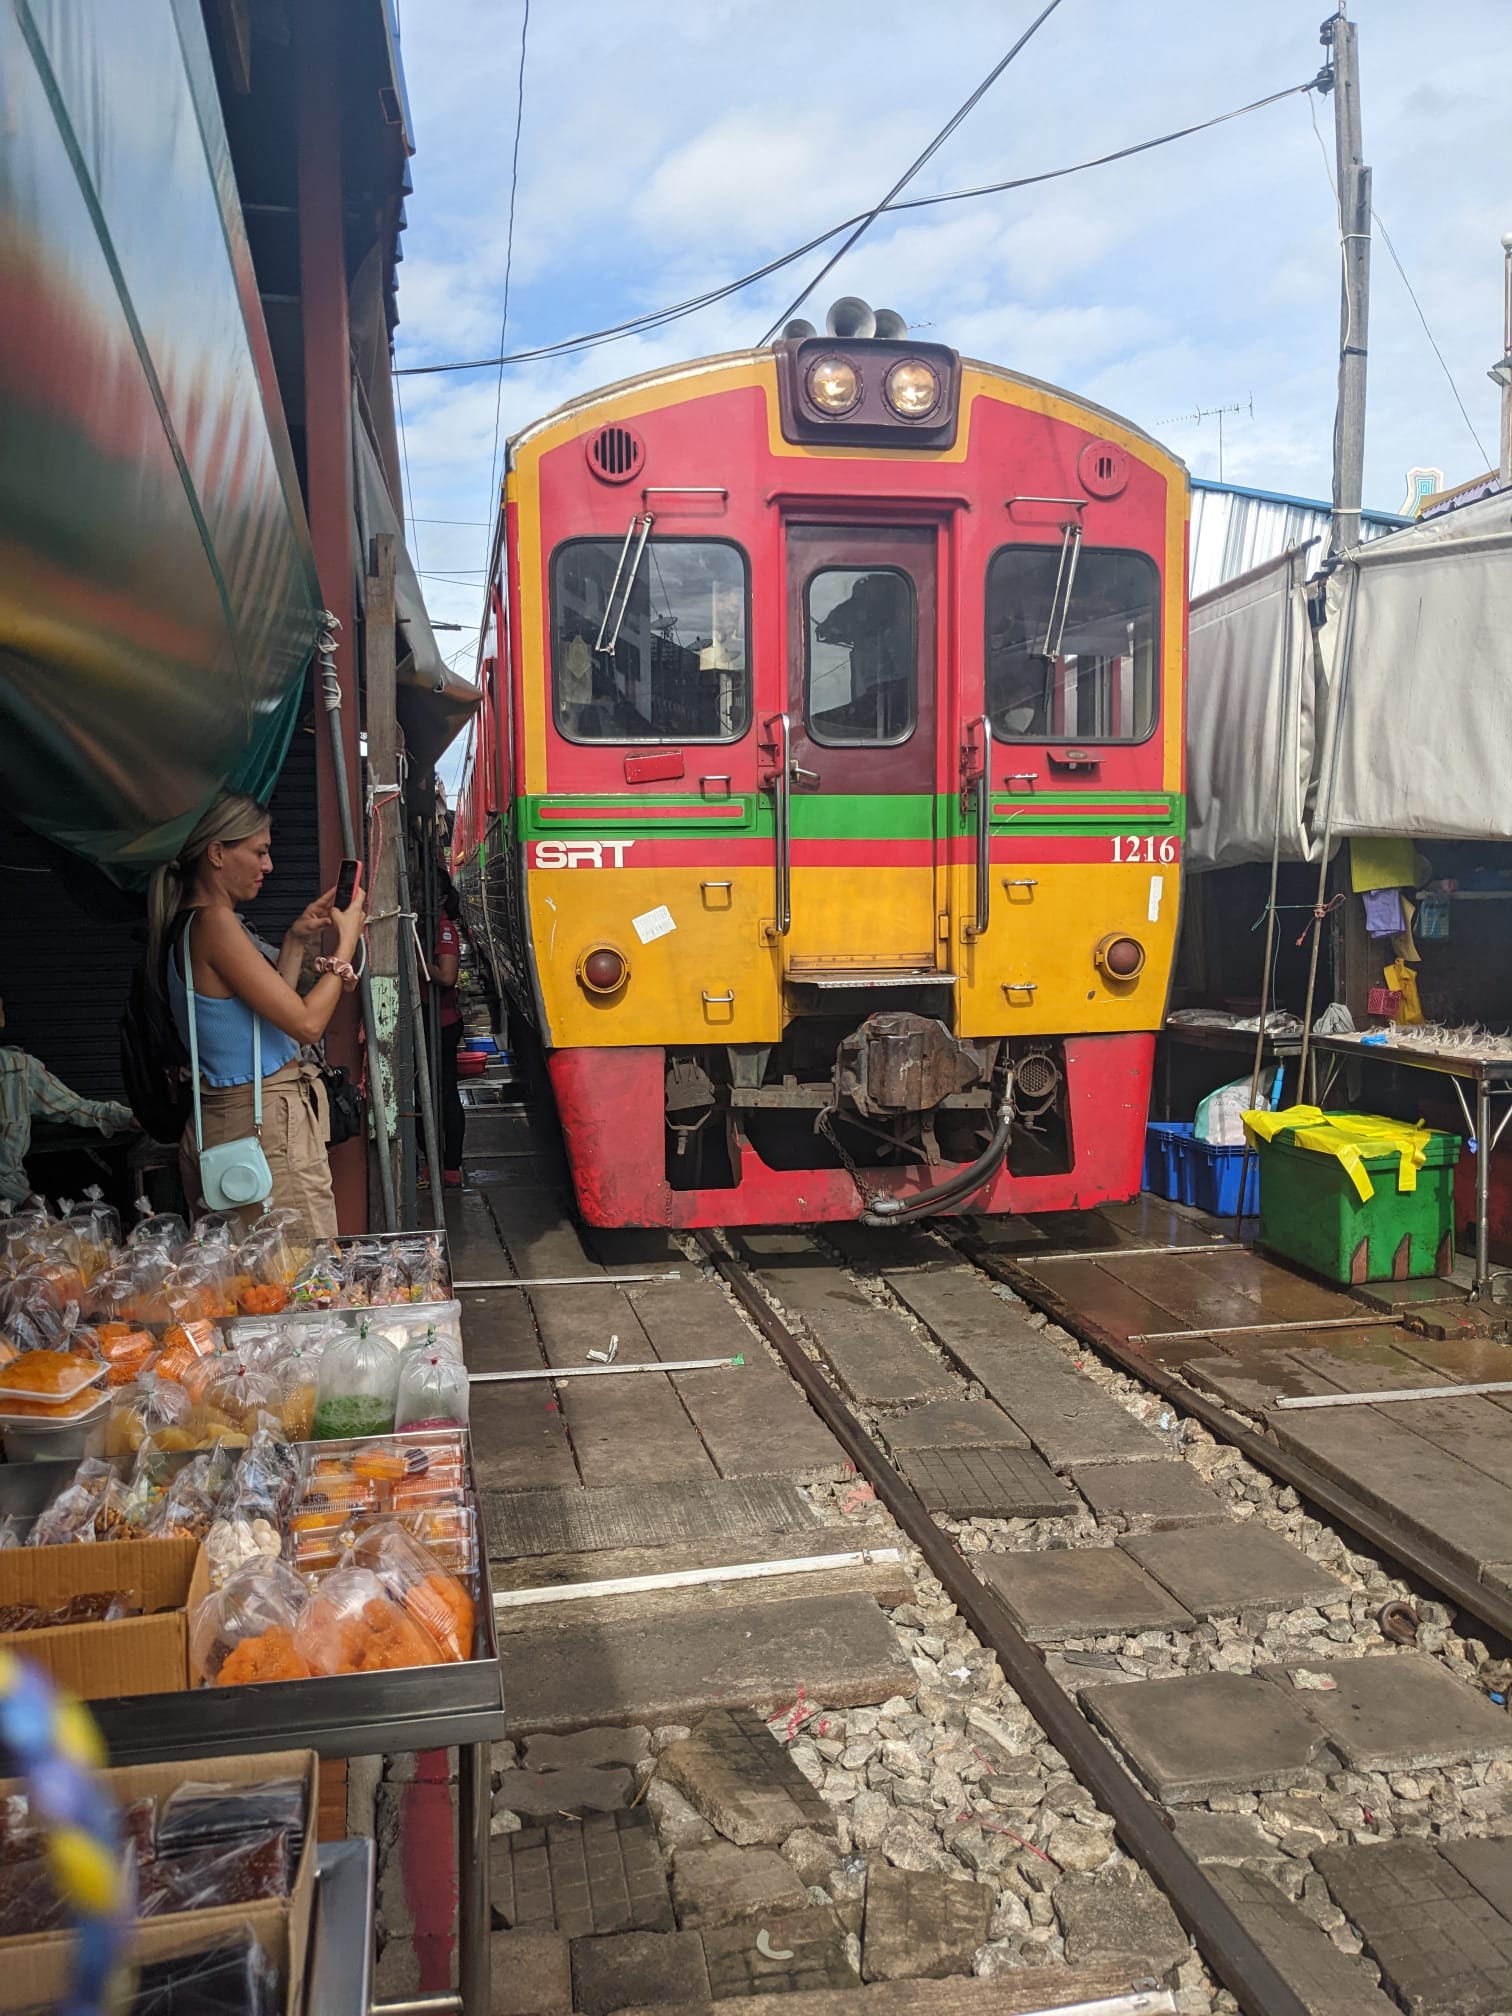 The train coming through the railway market. cost of 5 nights in Bangkok